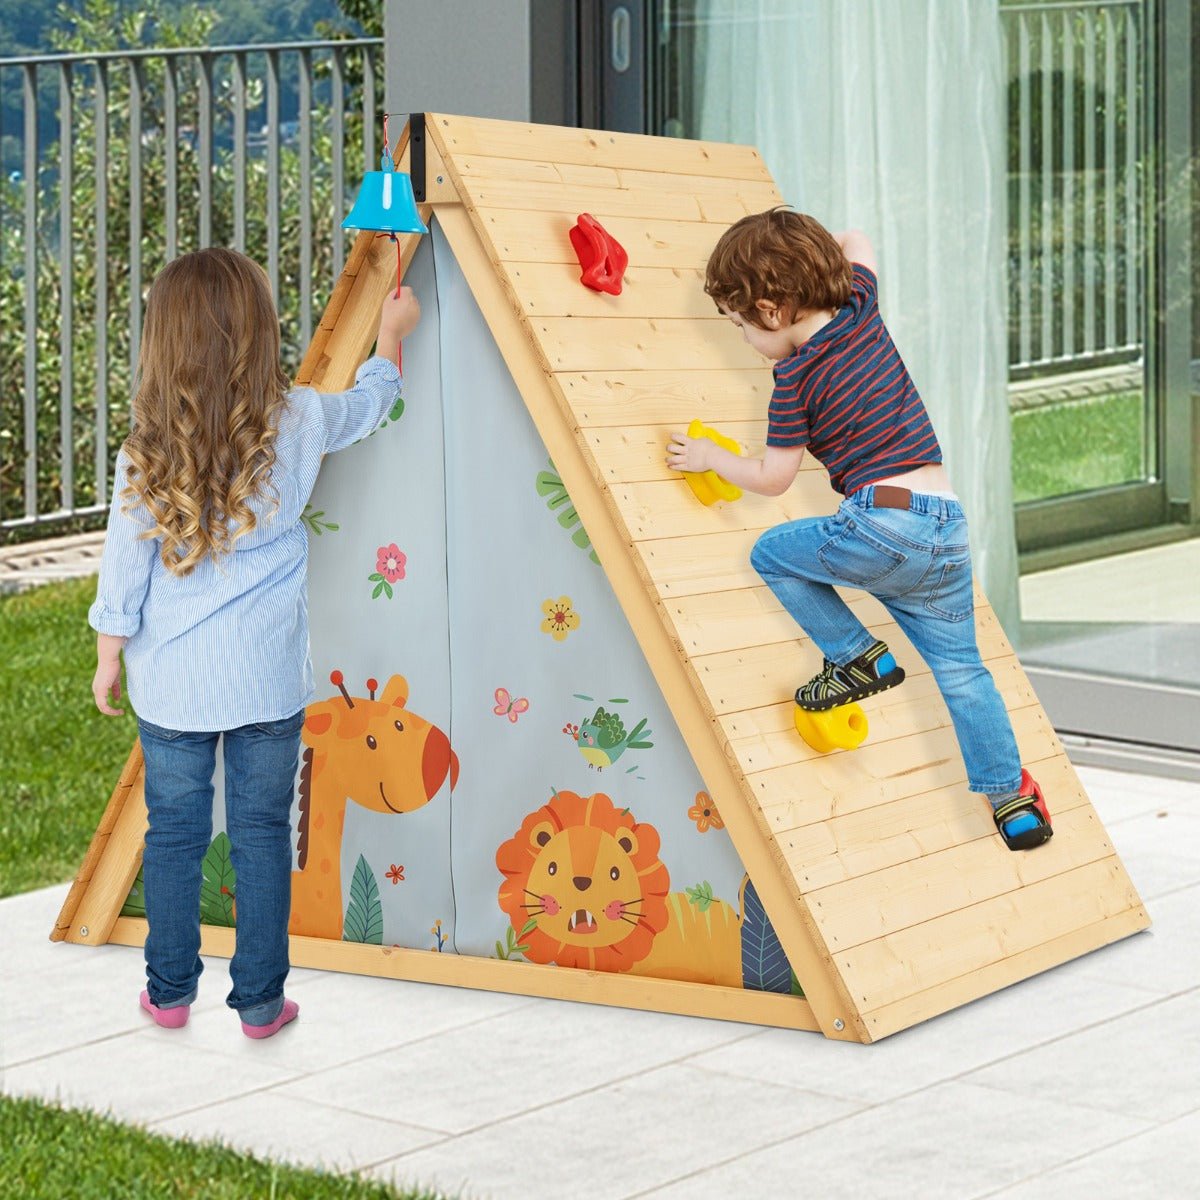 Explore and Play: 2-in-1 Kids Play Tent with Wooden Climbing Triangle